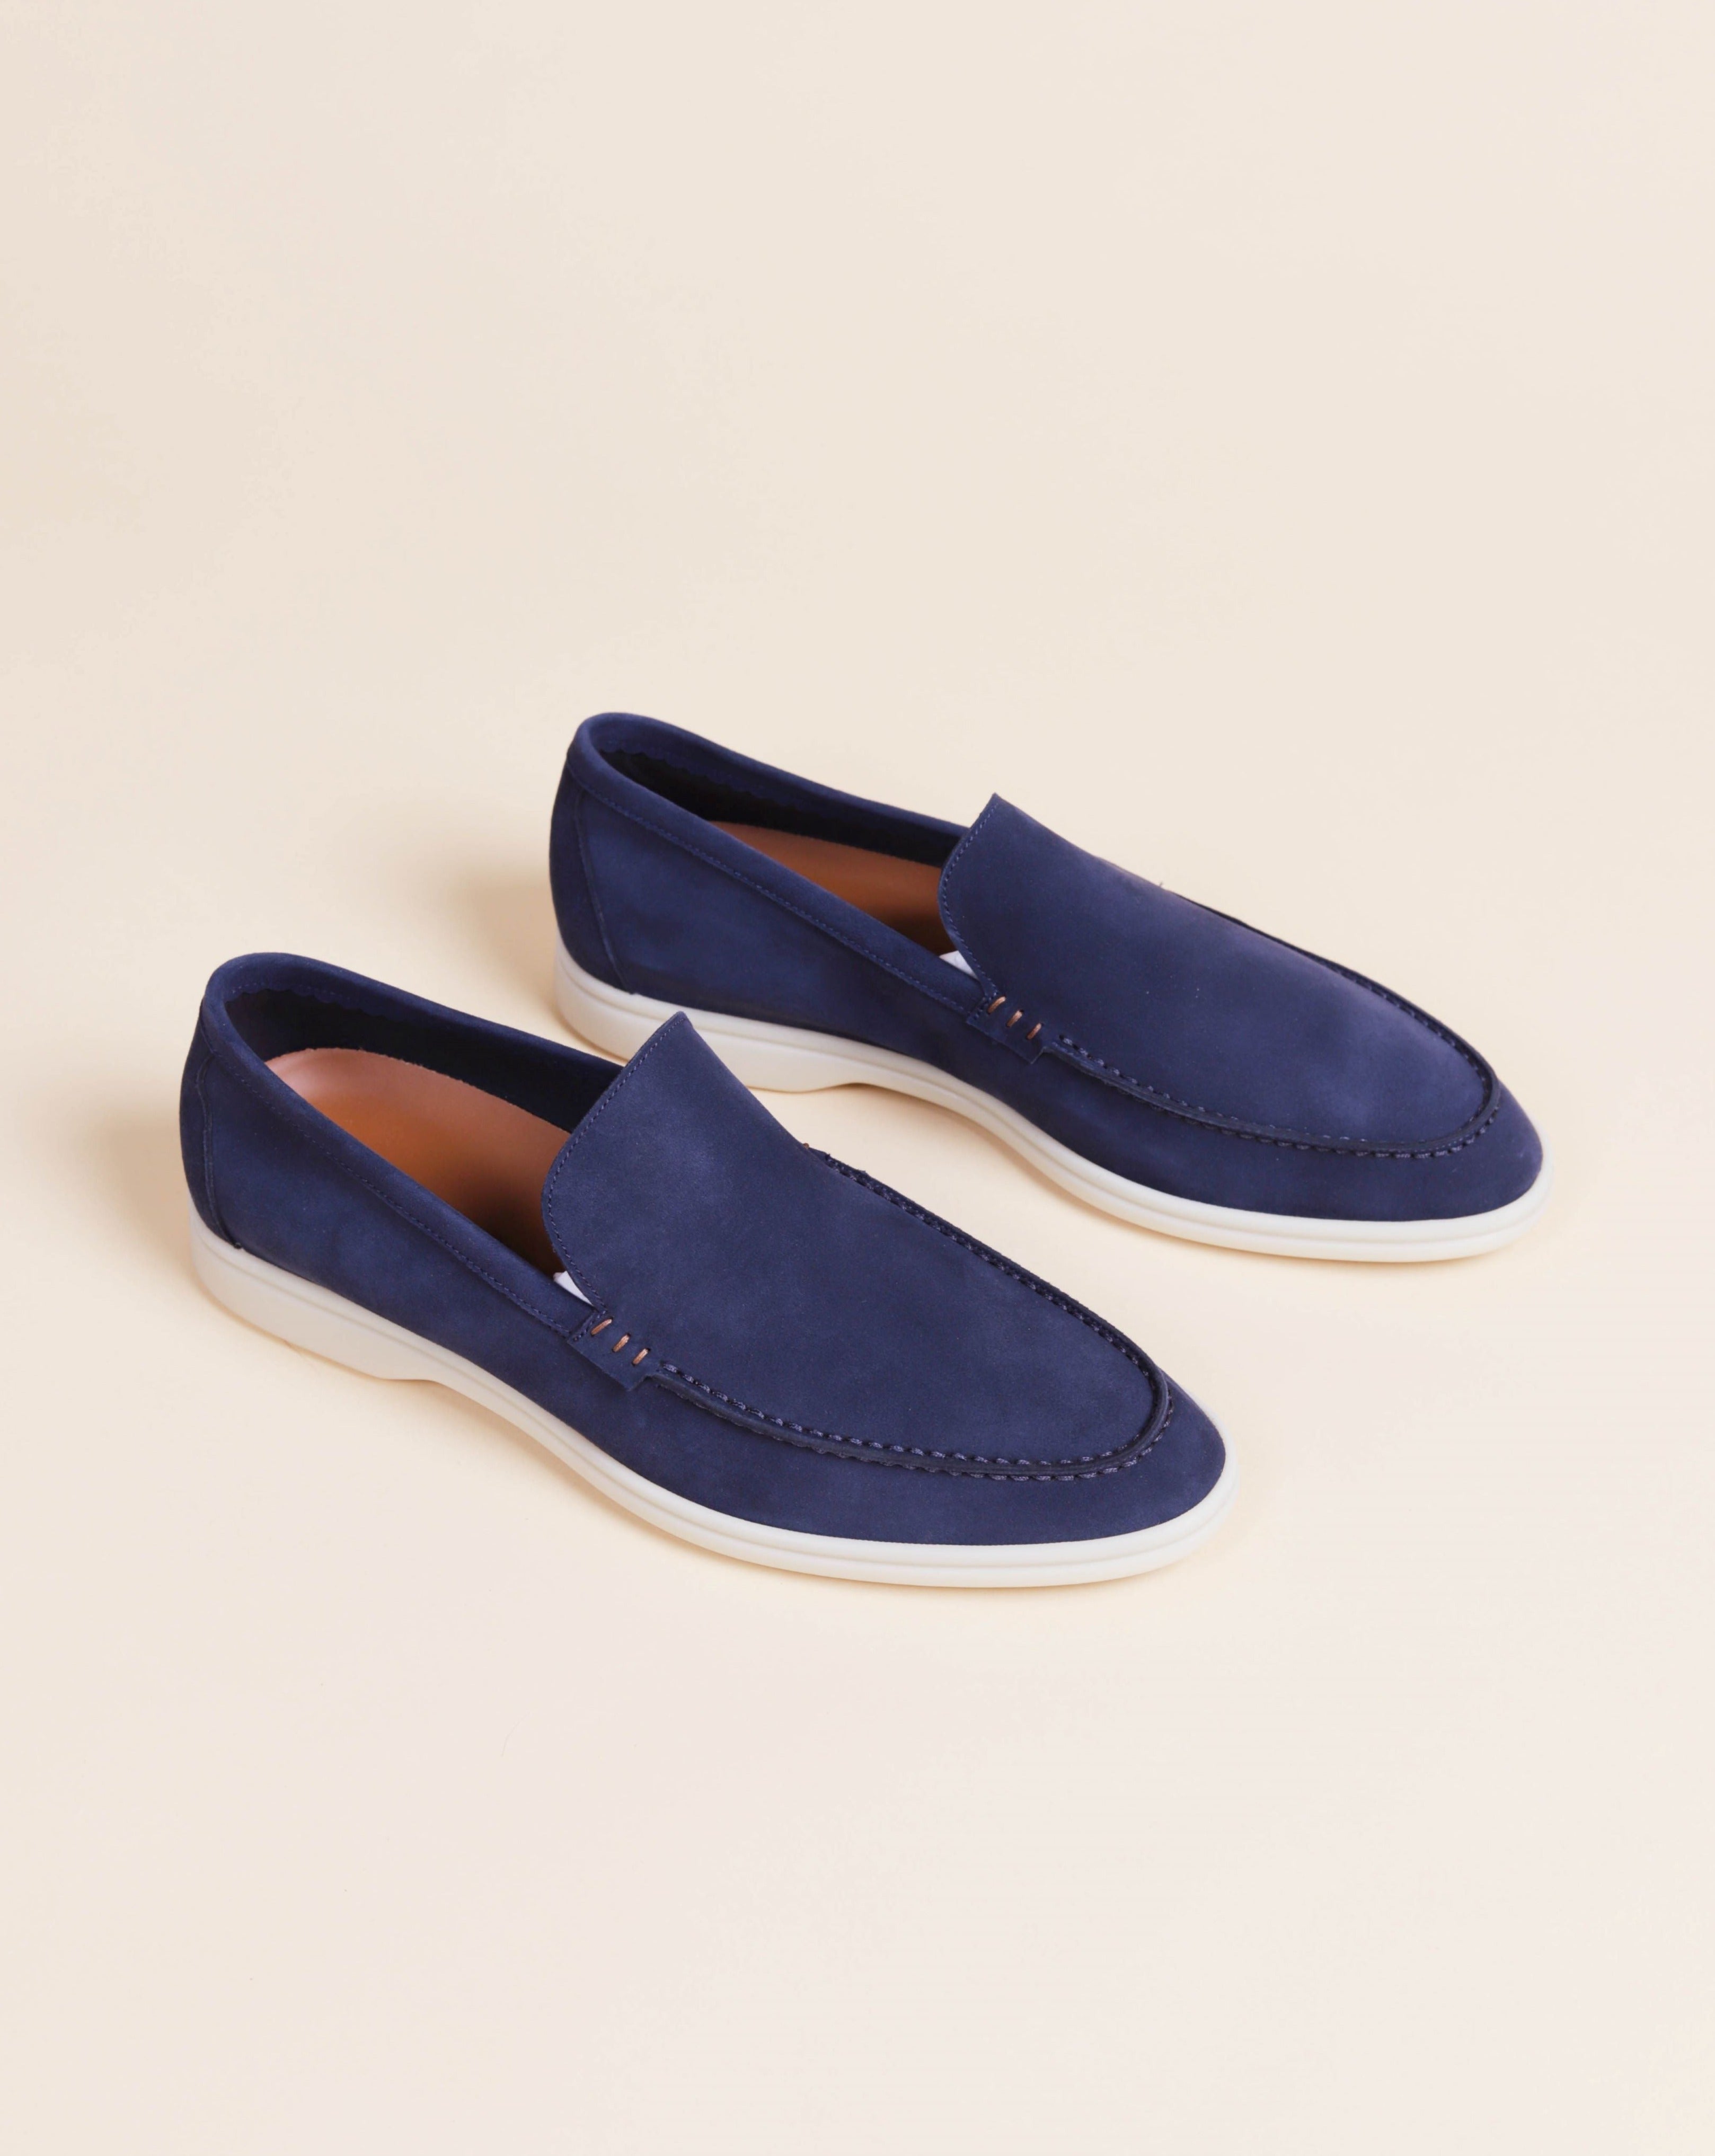 PS LOAFER SUEDE BLUE